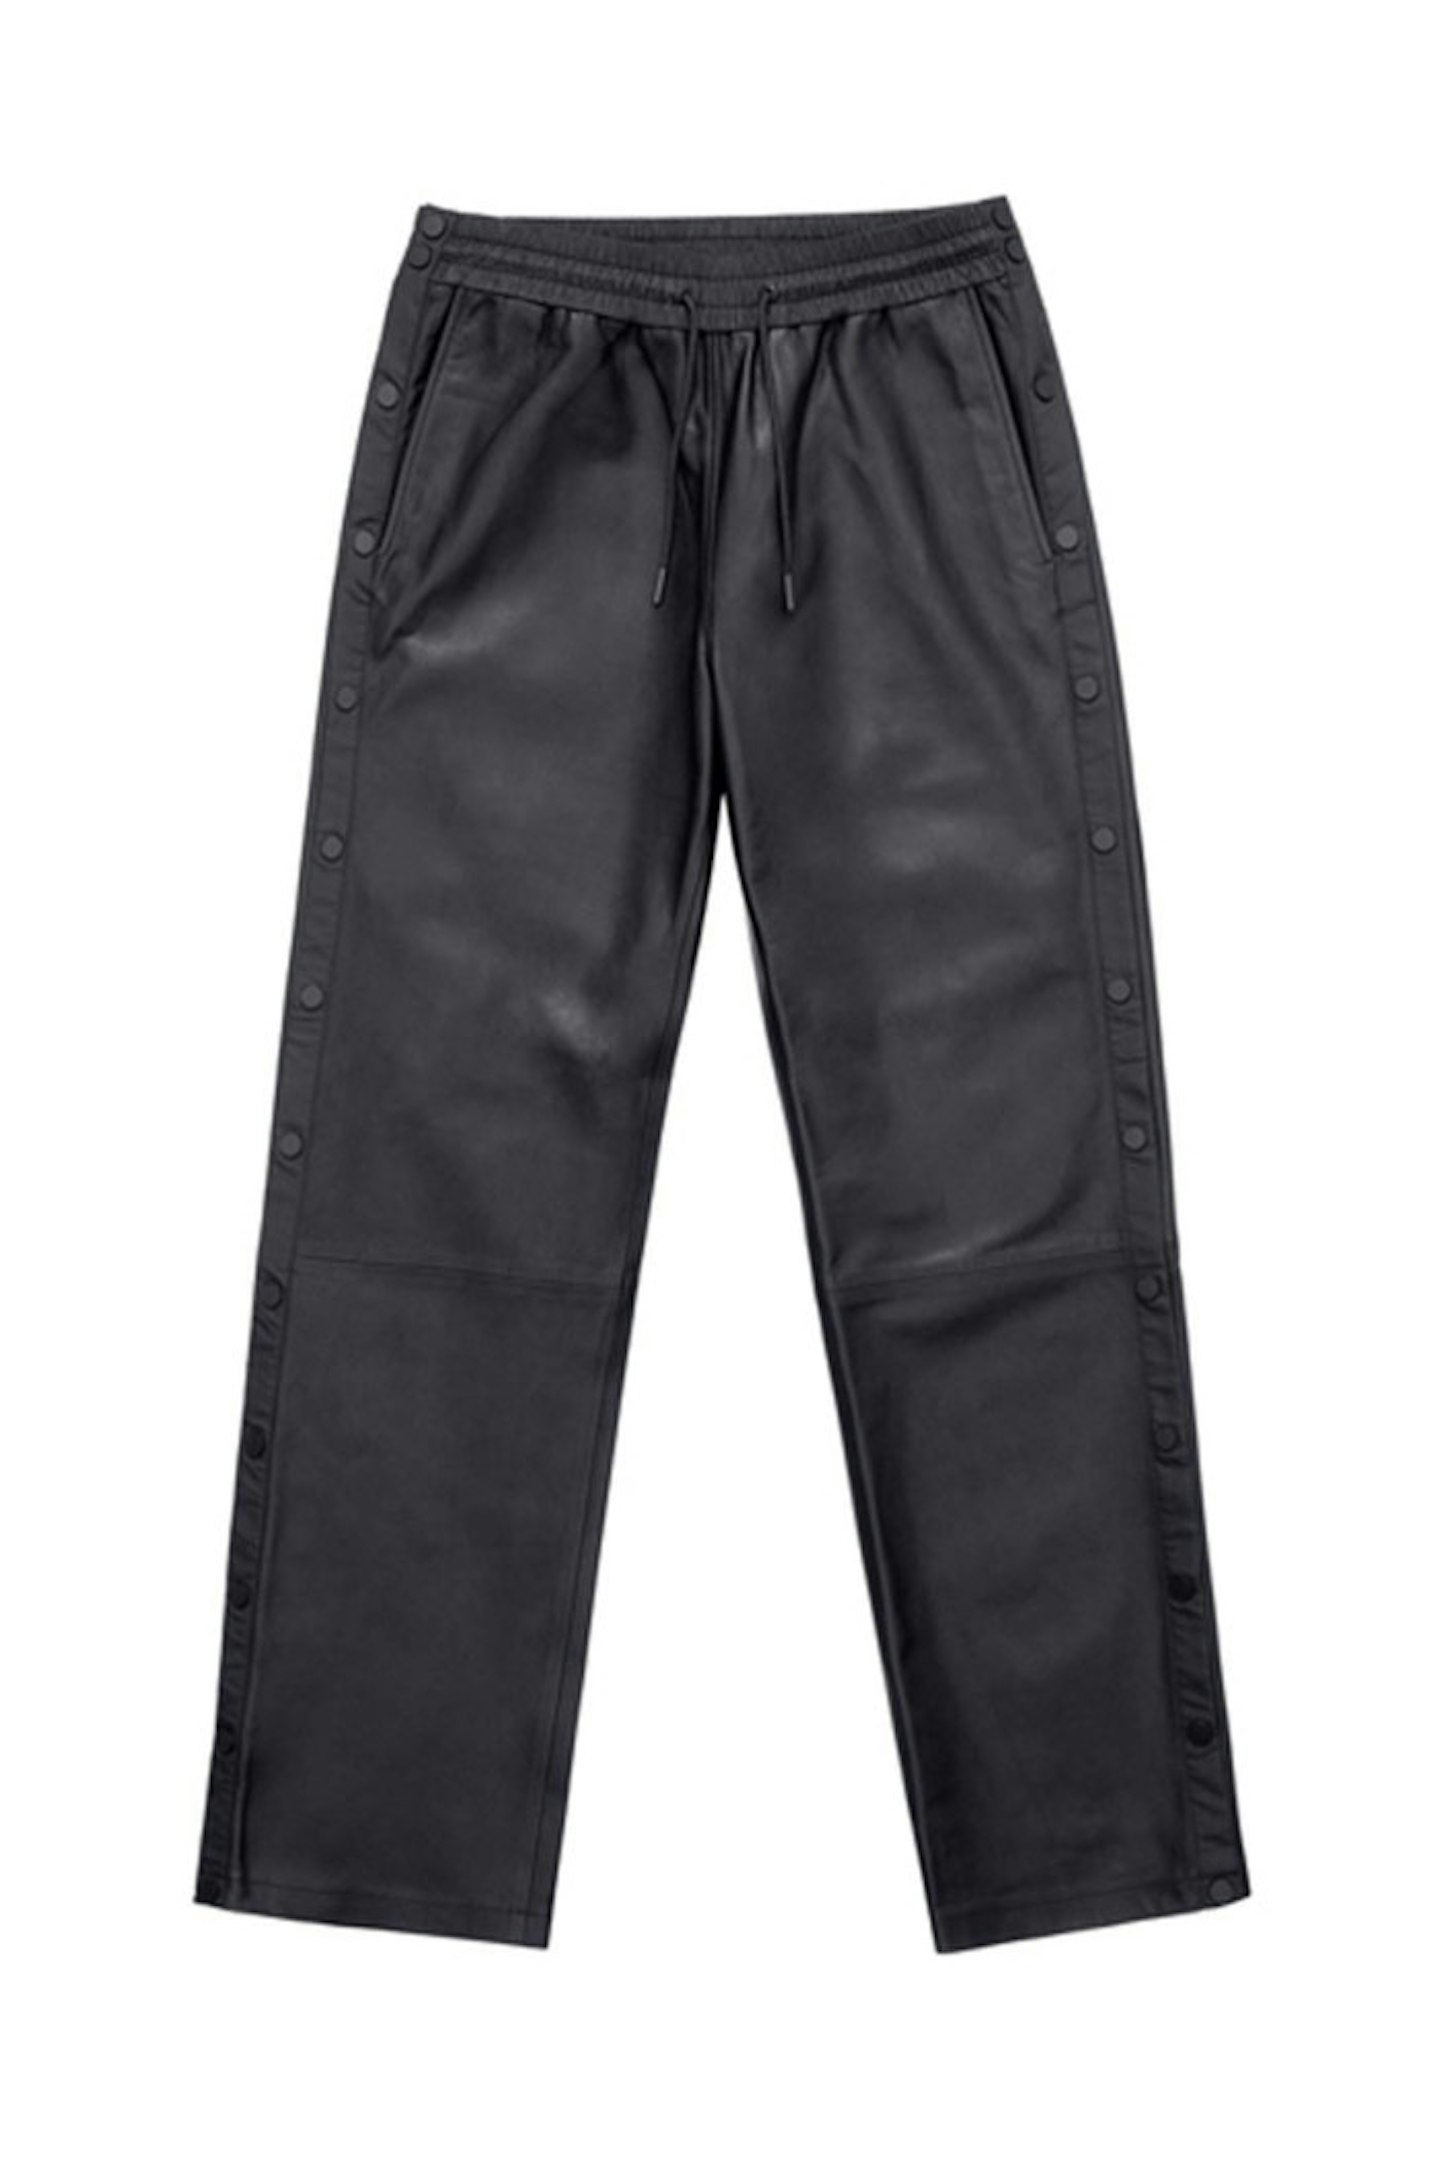 Leather trousers £179.99 by Alexander Wang x H&M